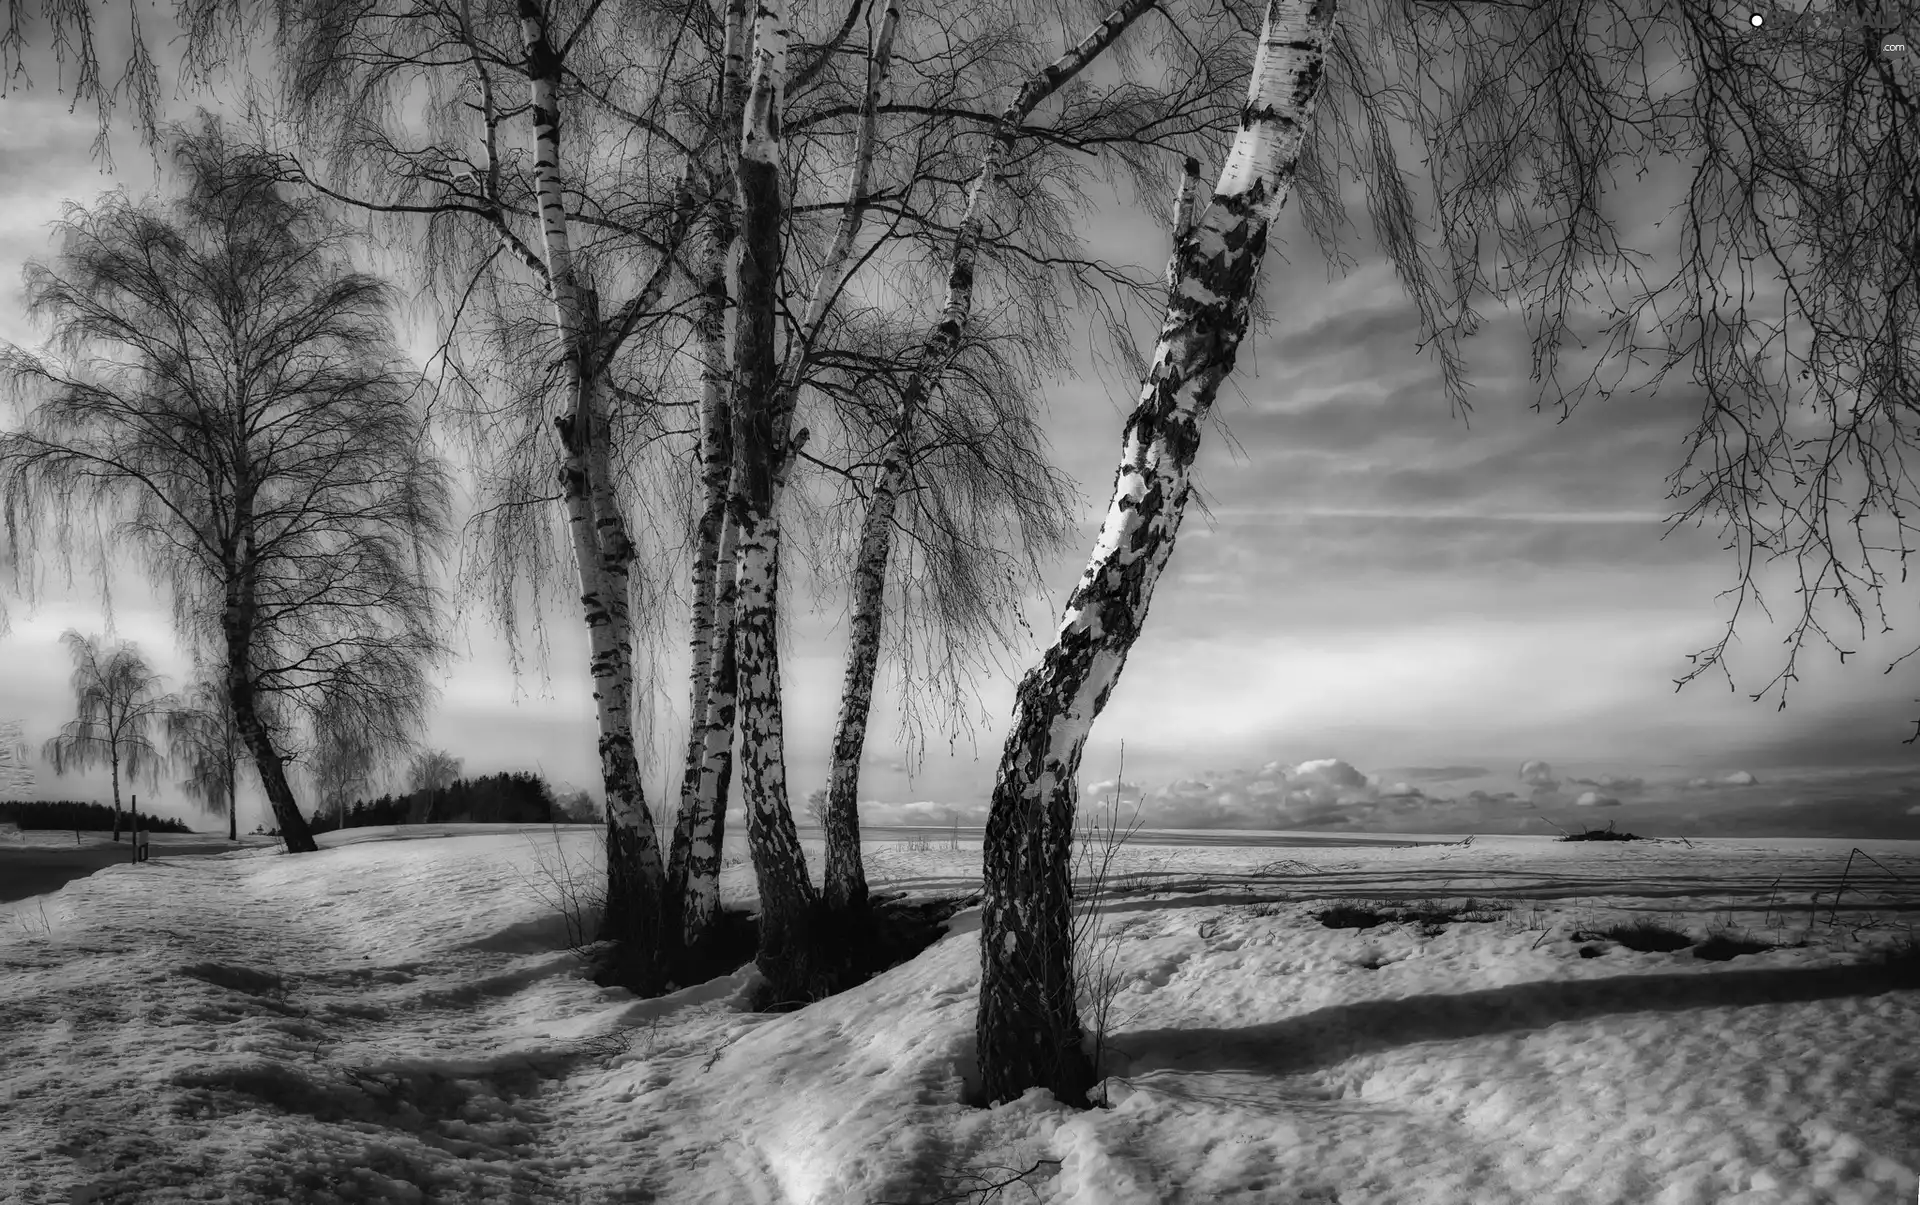 Way, winter, viewes, birch, trees